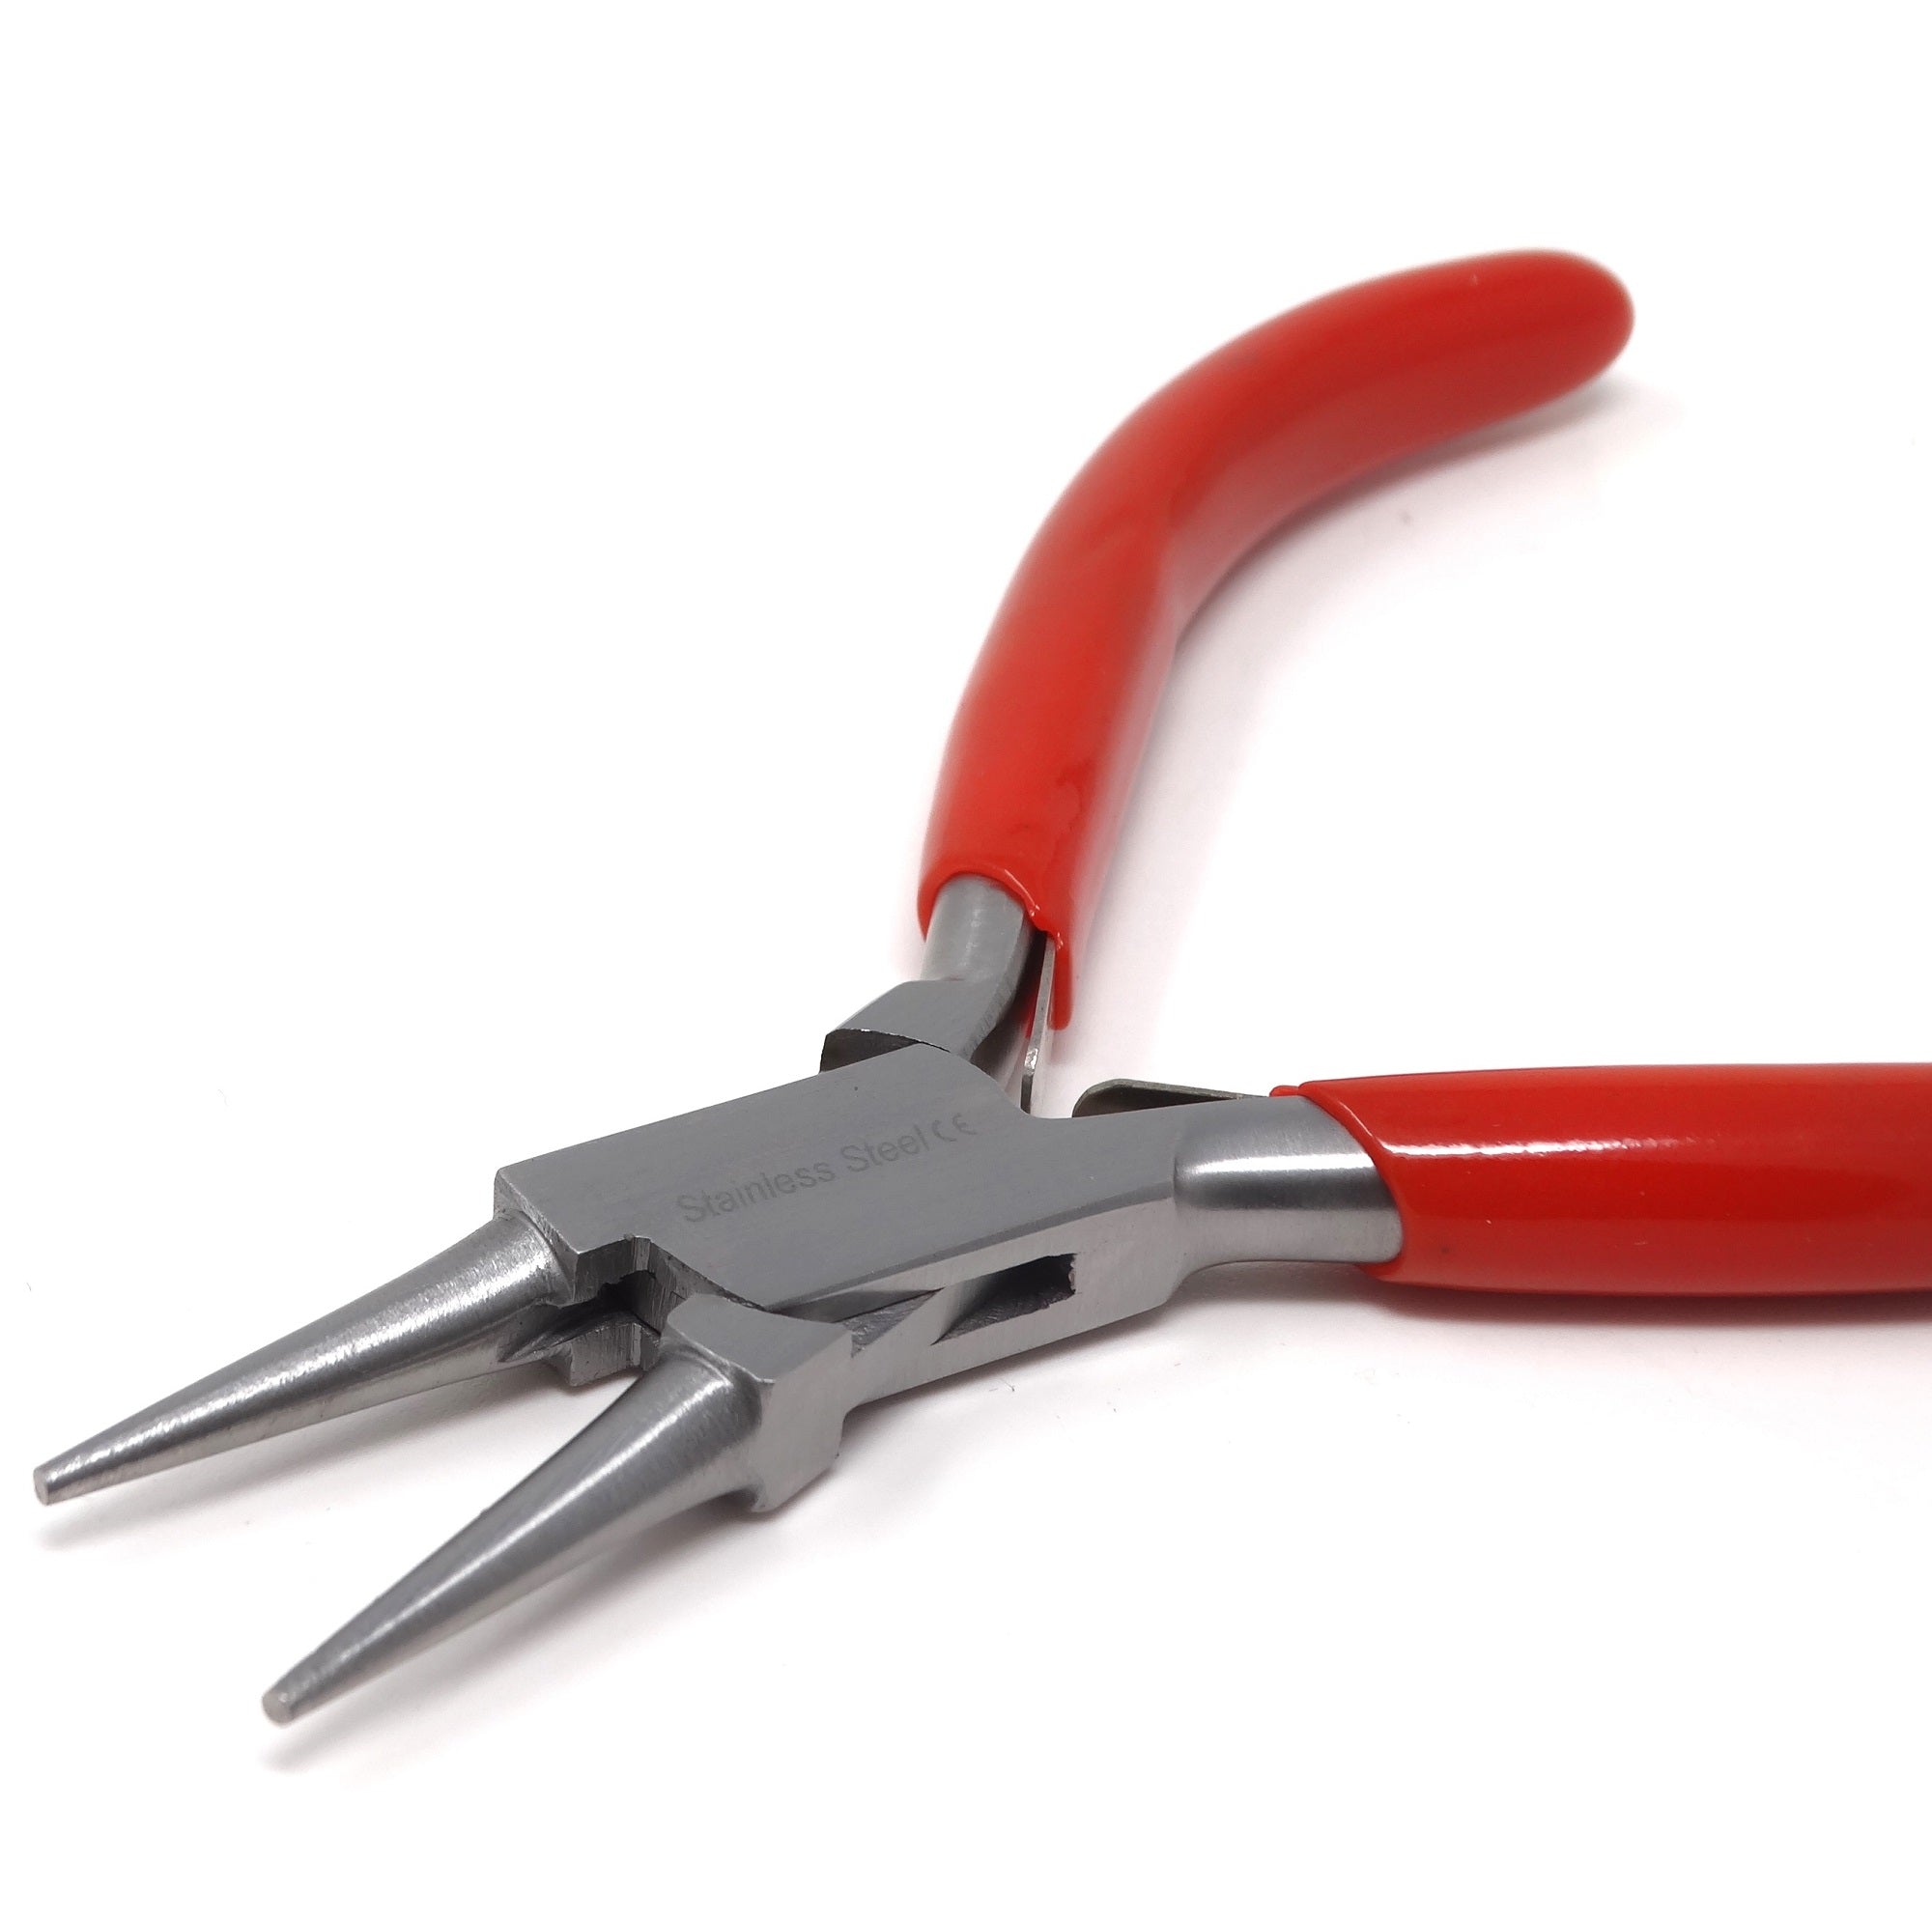 Chain Nose Plier Stainless Steel Jewelry Making Supplies